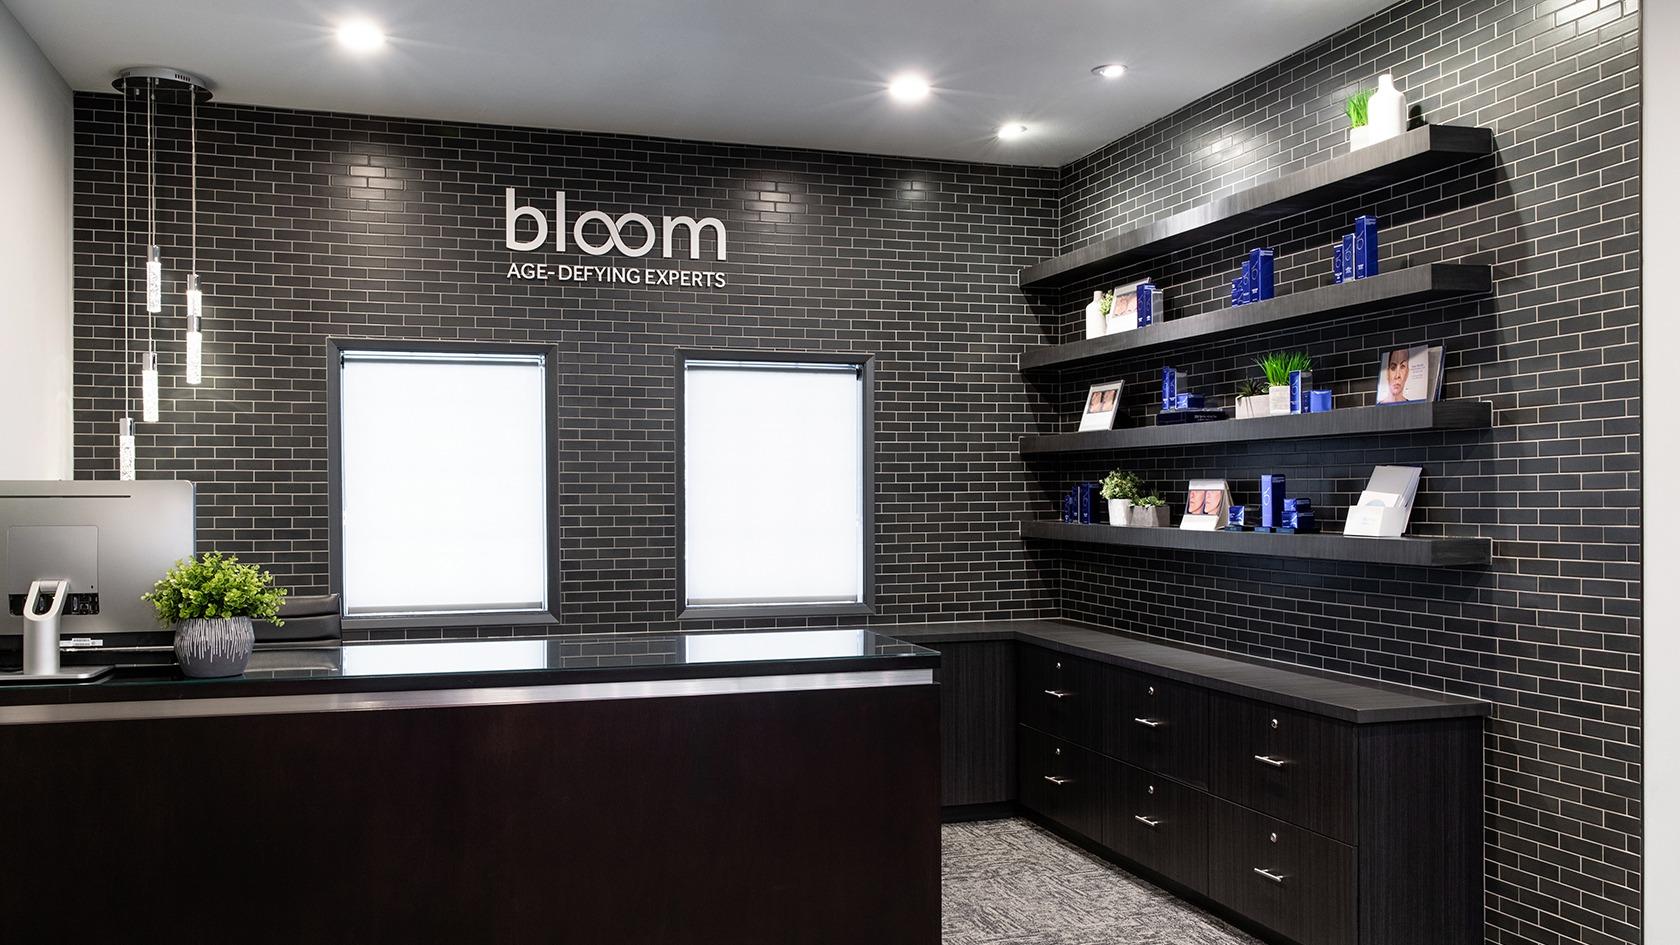 Bloom - Advanced Med Spa - Age-Defying Experts